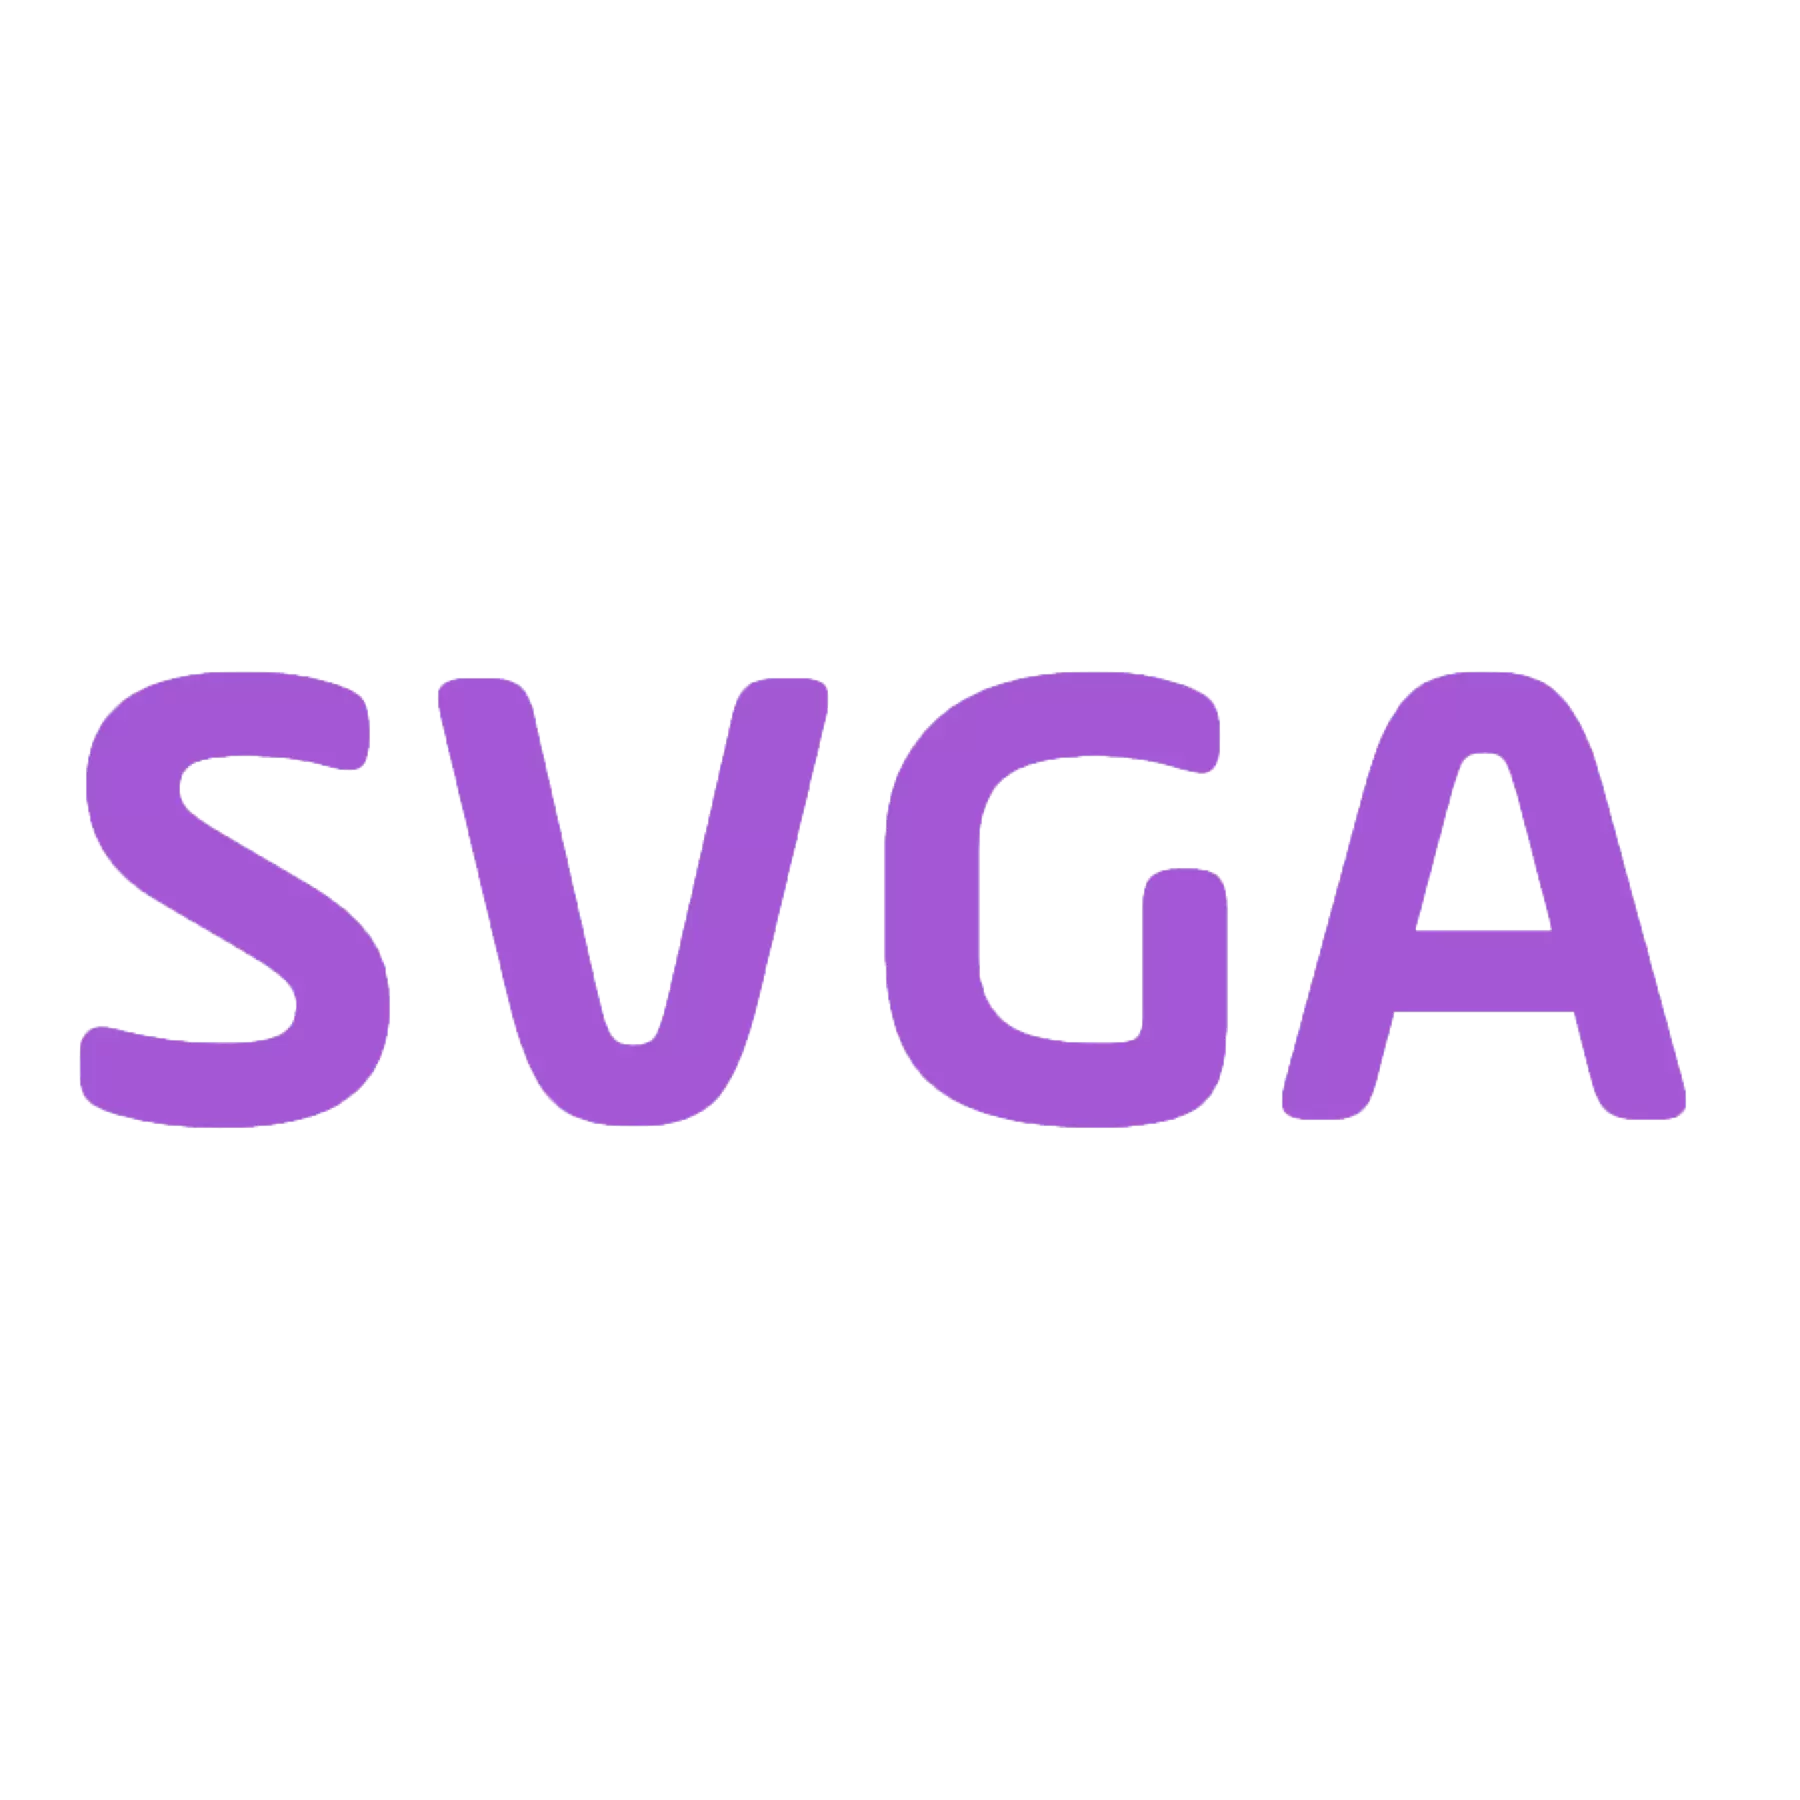 Svga Preview 0.1.0 Extension for Visual Studio Code